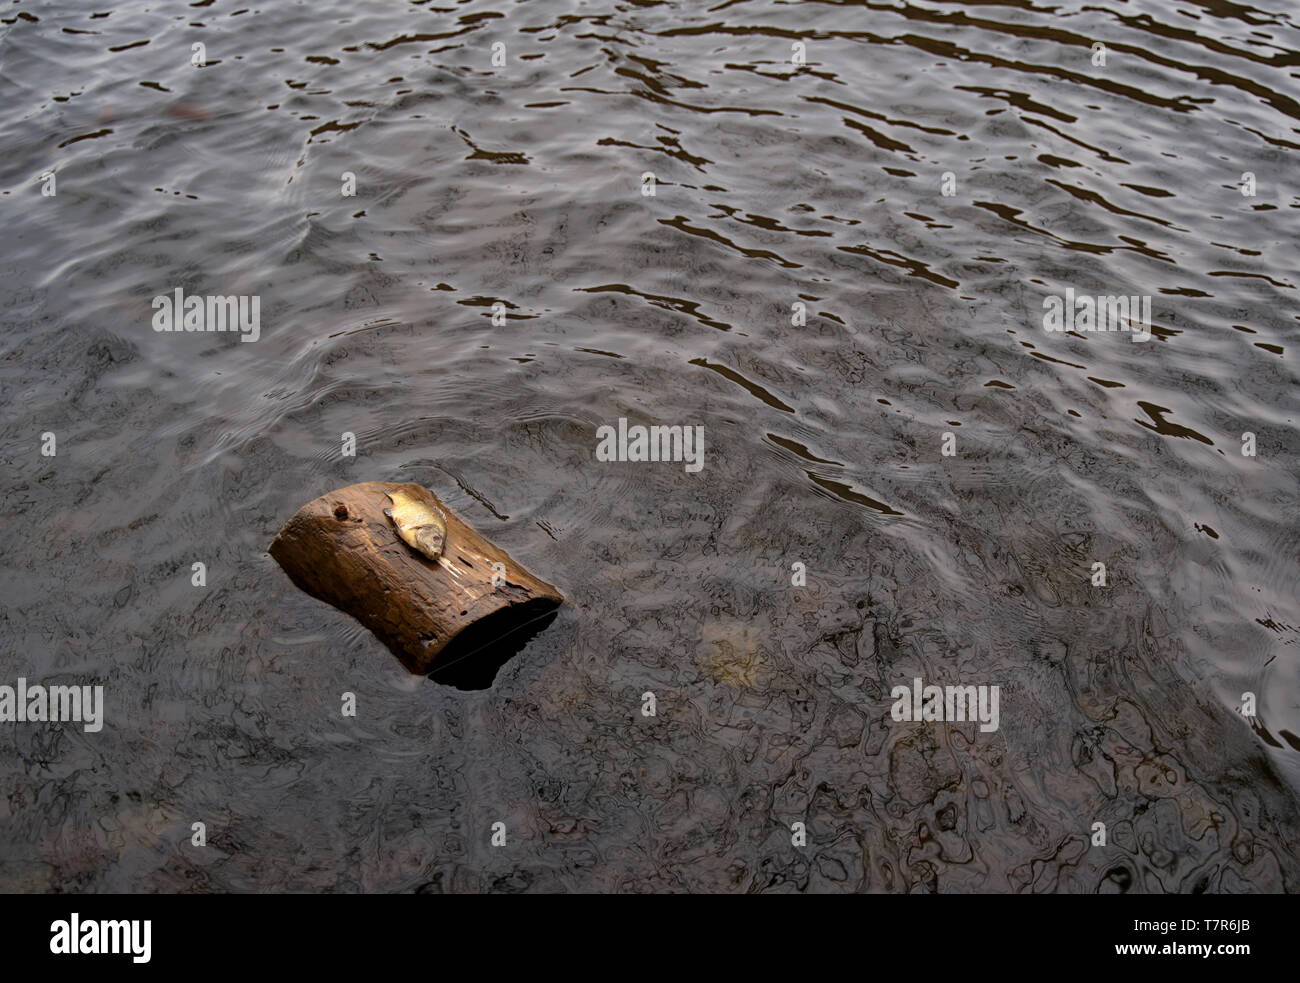 An unusual event of a dead fish on a floating log in the middle of the water. Stock Photo